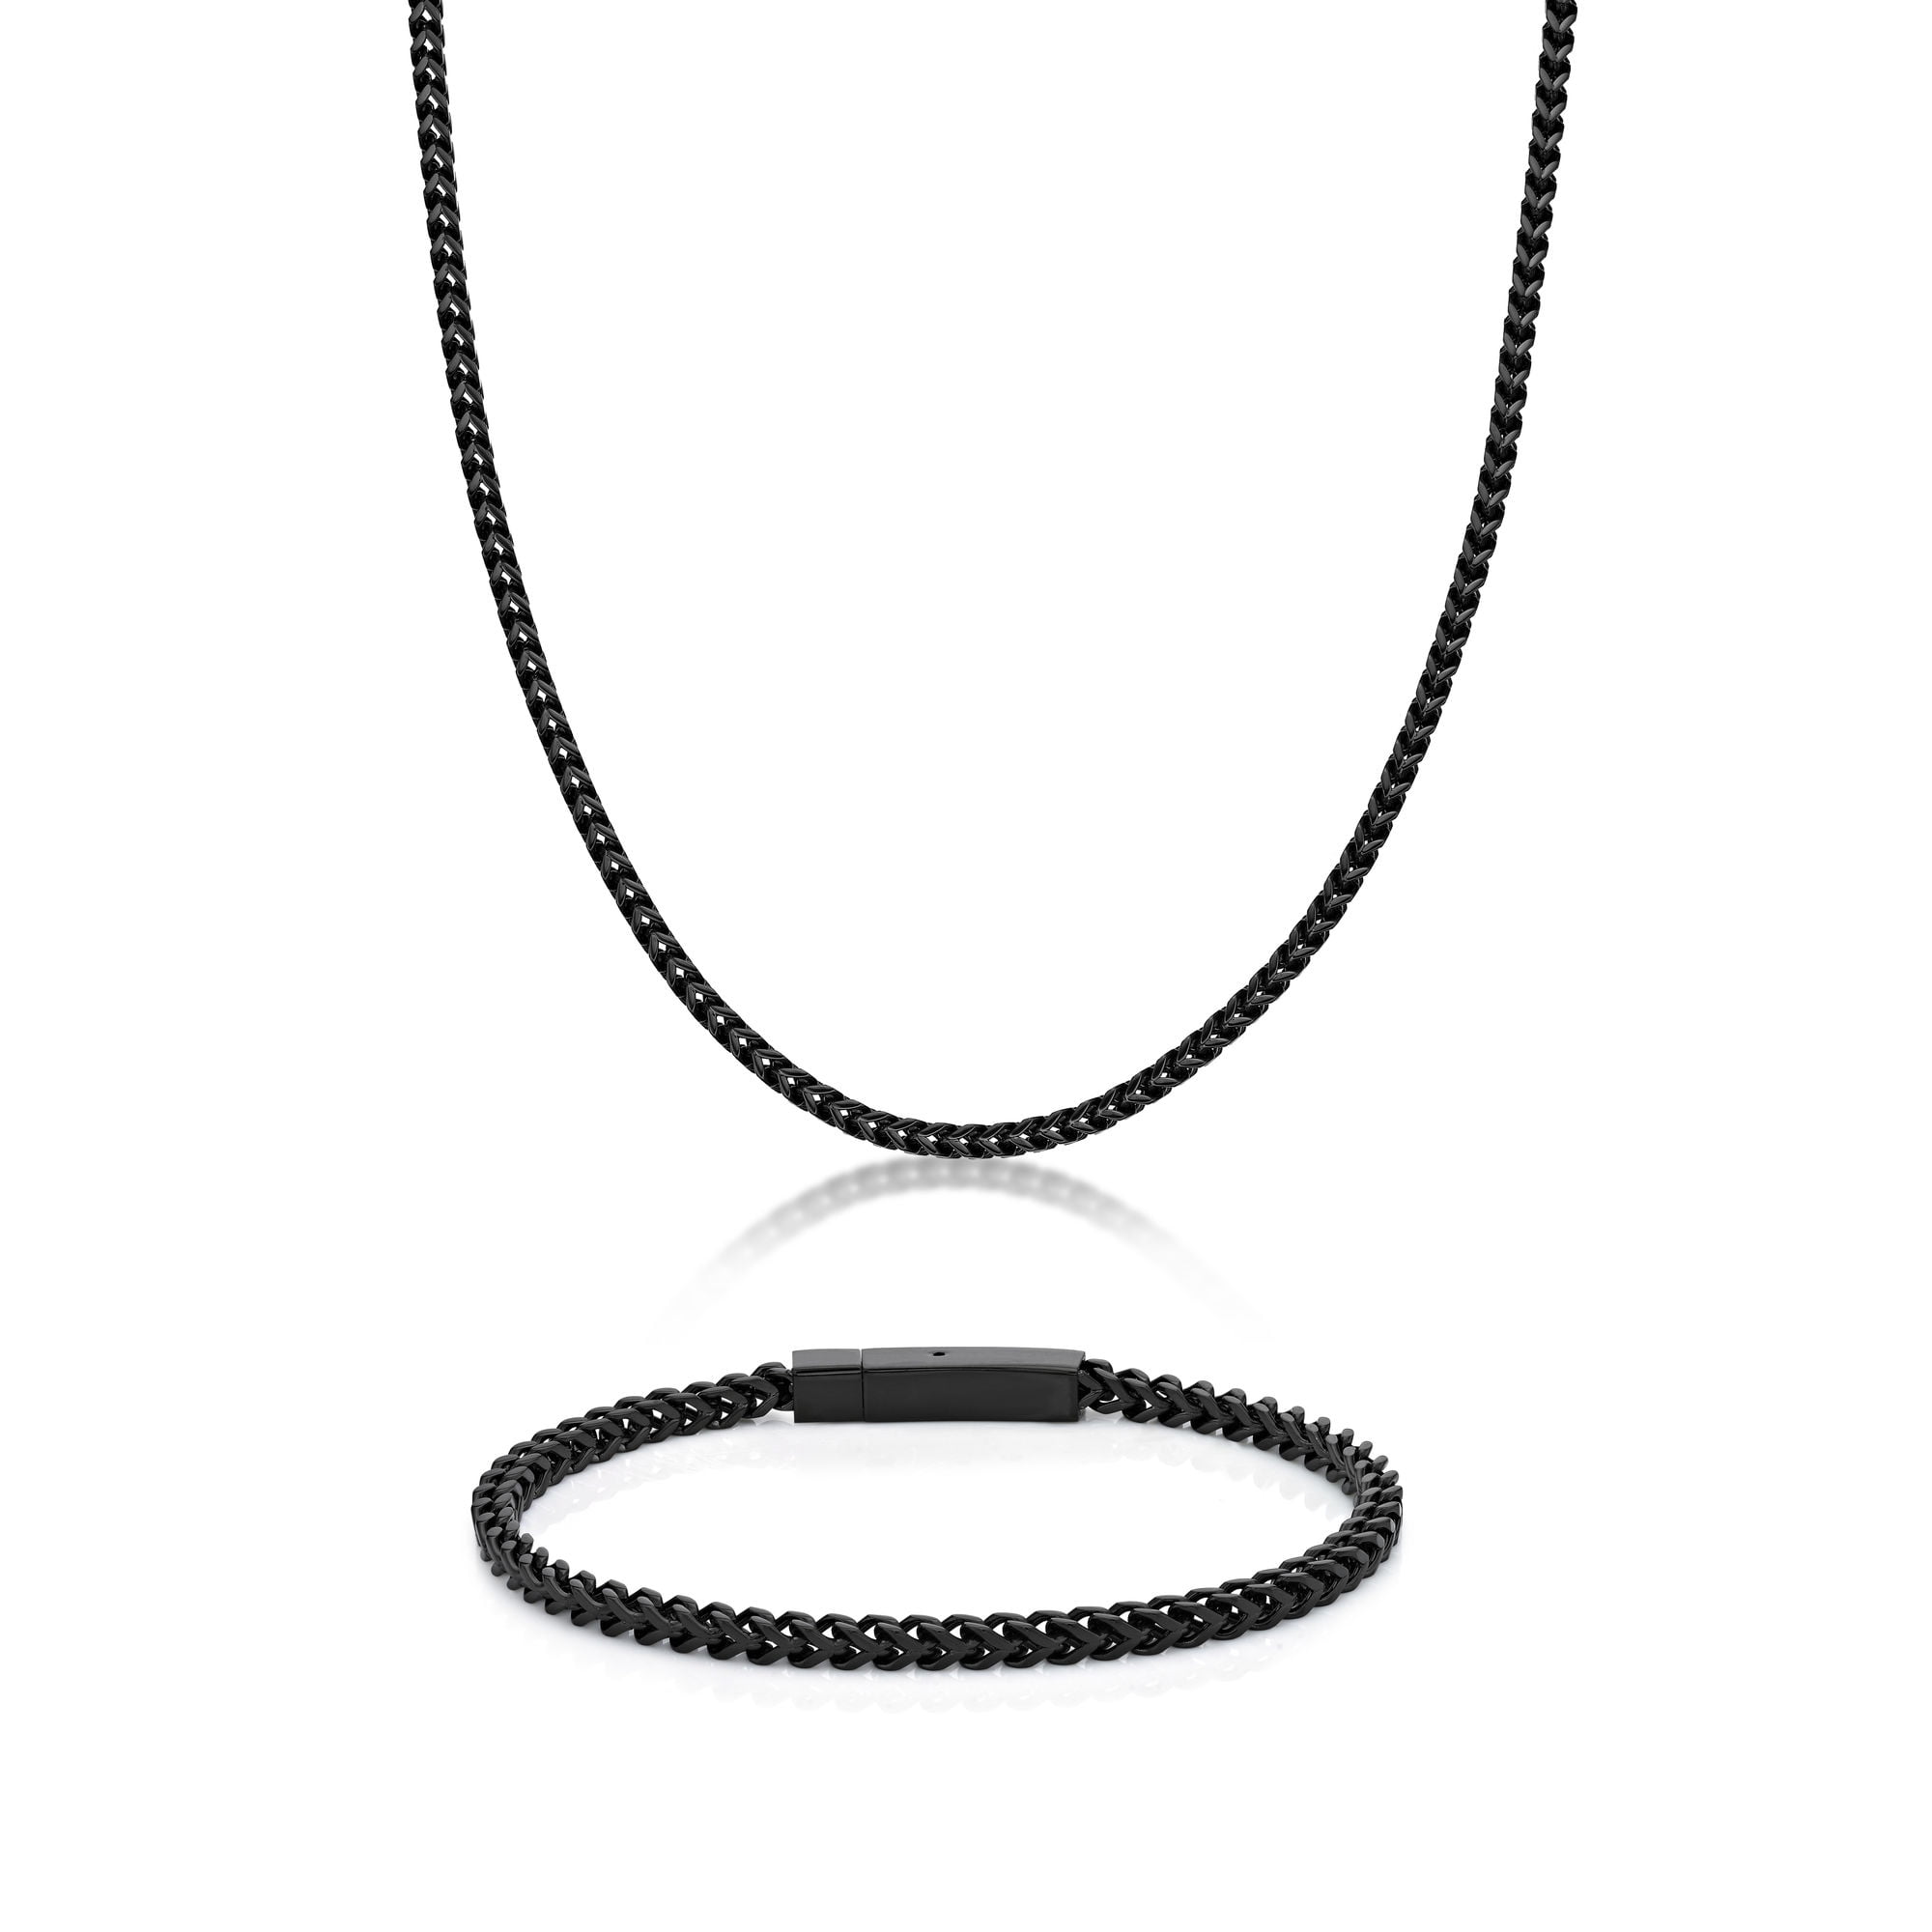 FOXR Lether Base Metal Chain With Pendant for Men & Boys (Black) Leather  Chain Price in India - Buy FOXR Lether Base Metal Chain With Pendant for  Men & Boys (Black) Leather